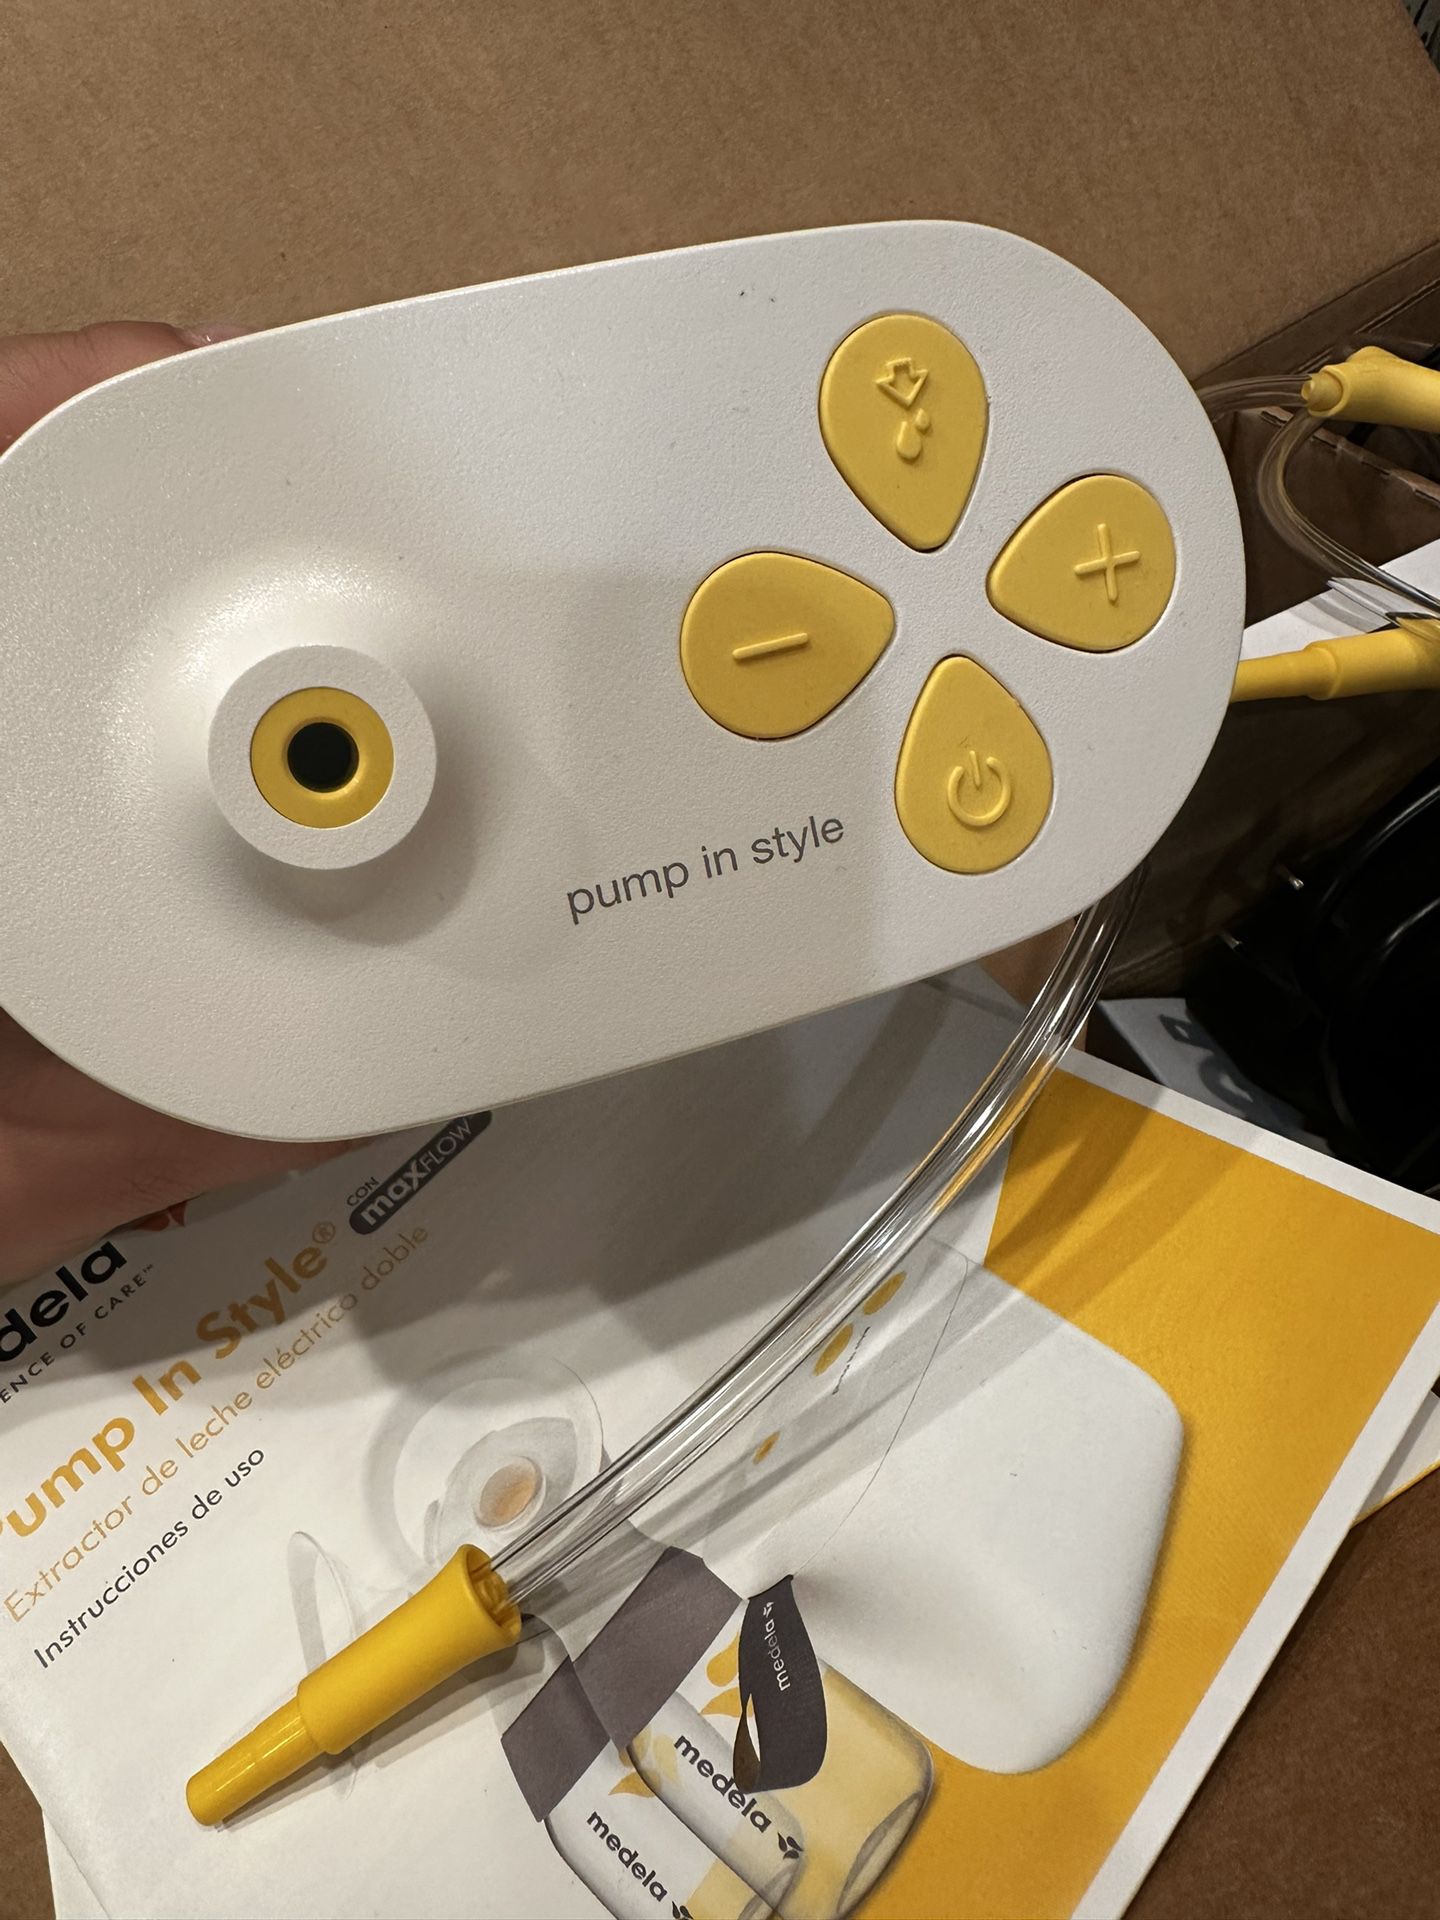 Medela Pump In Style with MaxFlow Breast Pump